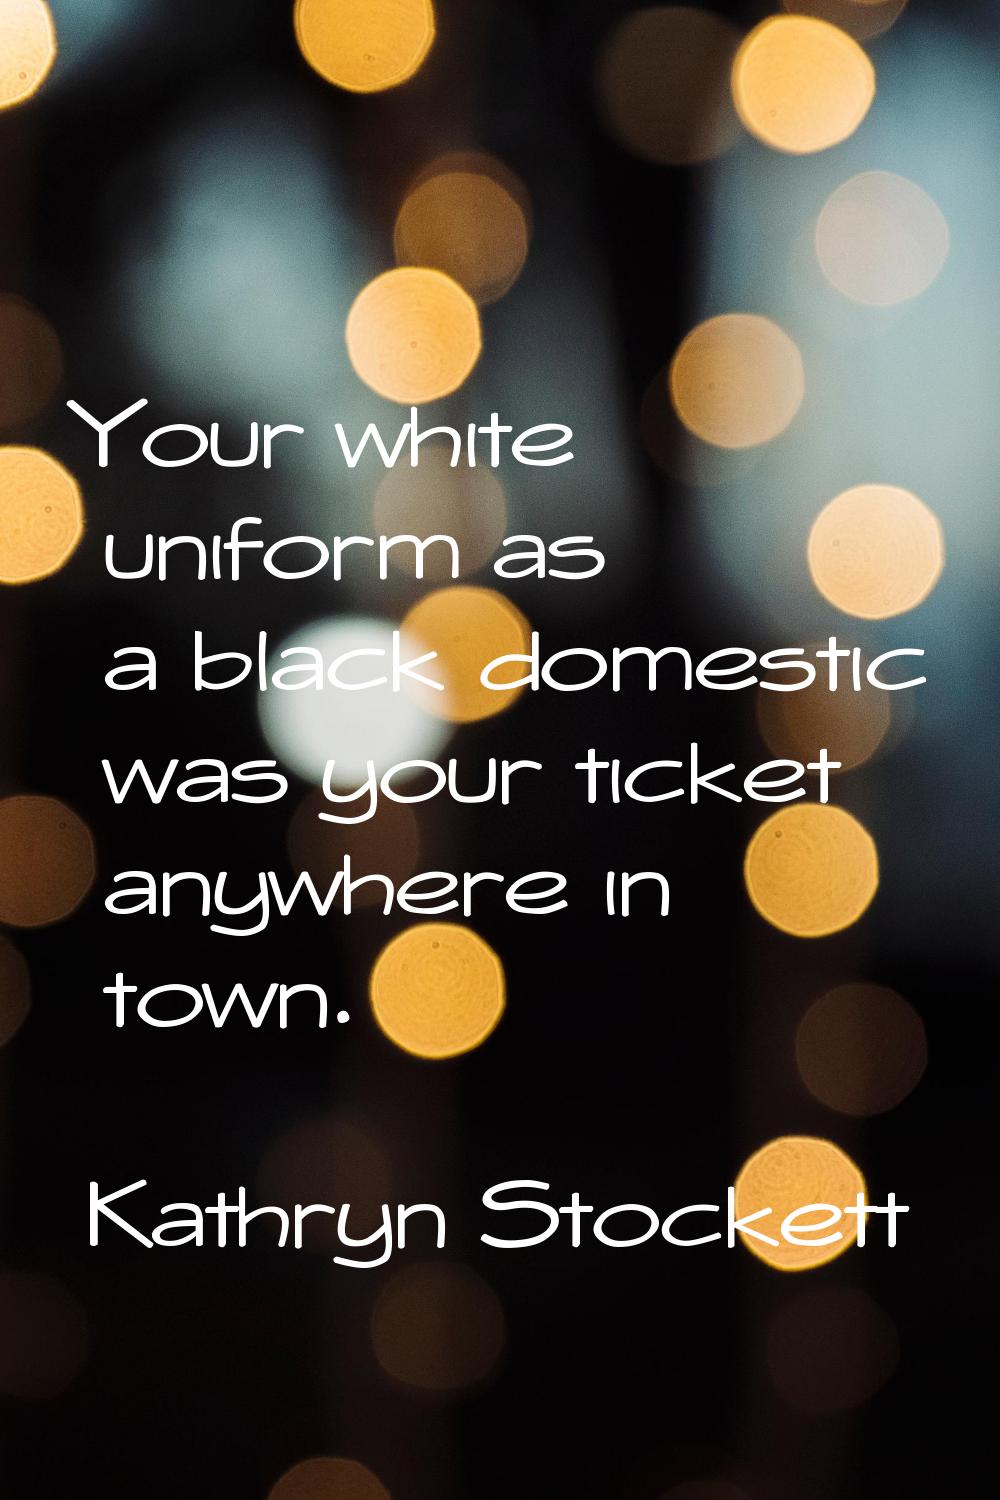 Your white uniform as a black domestic was your ticket anywhere in town.